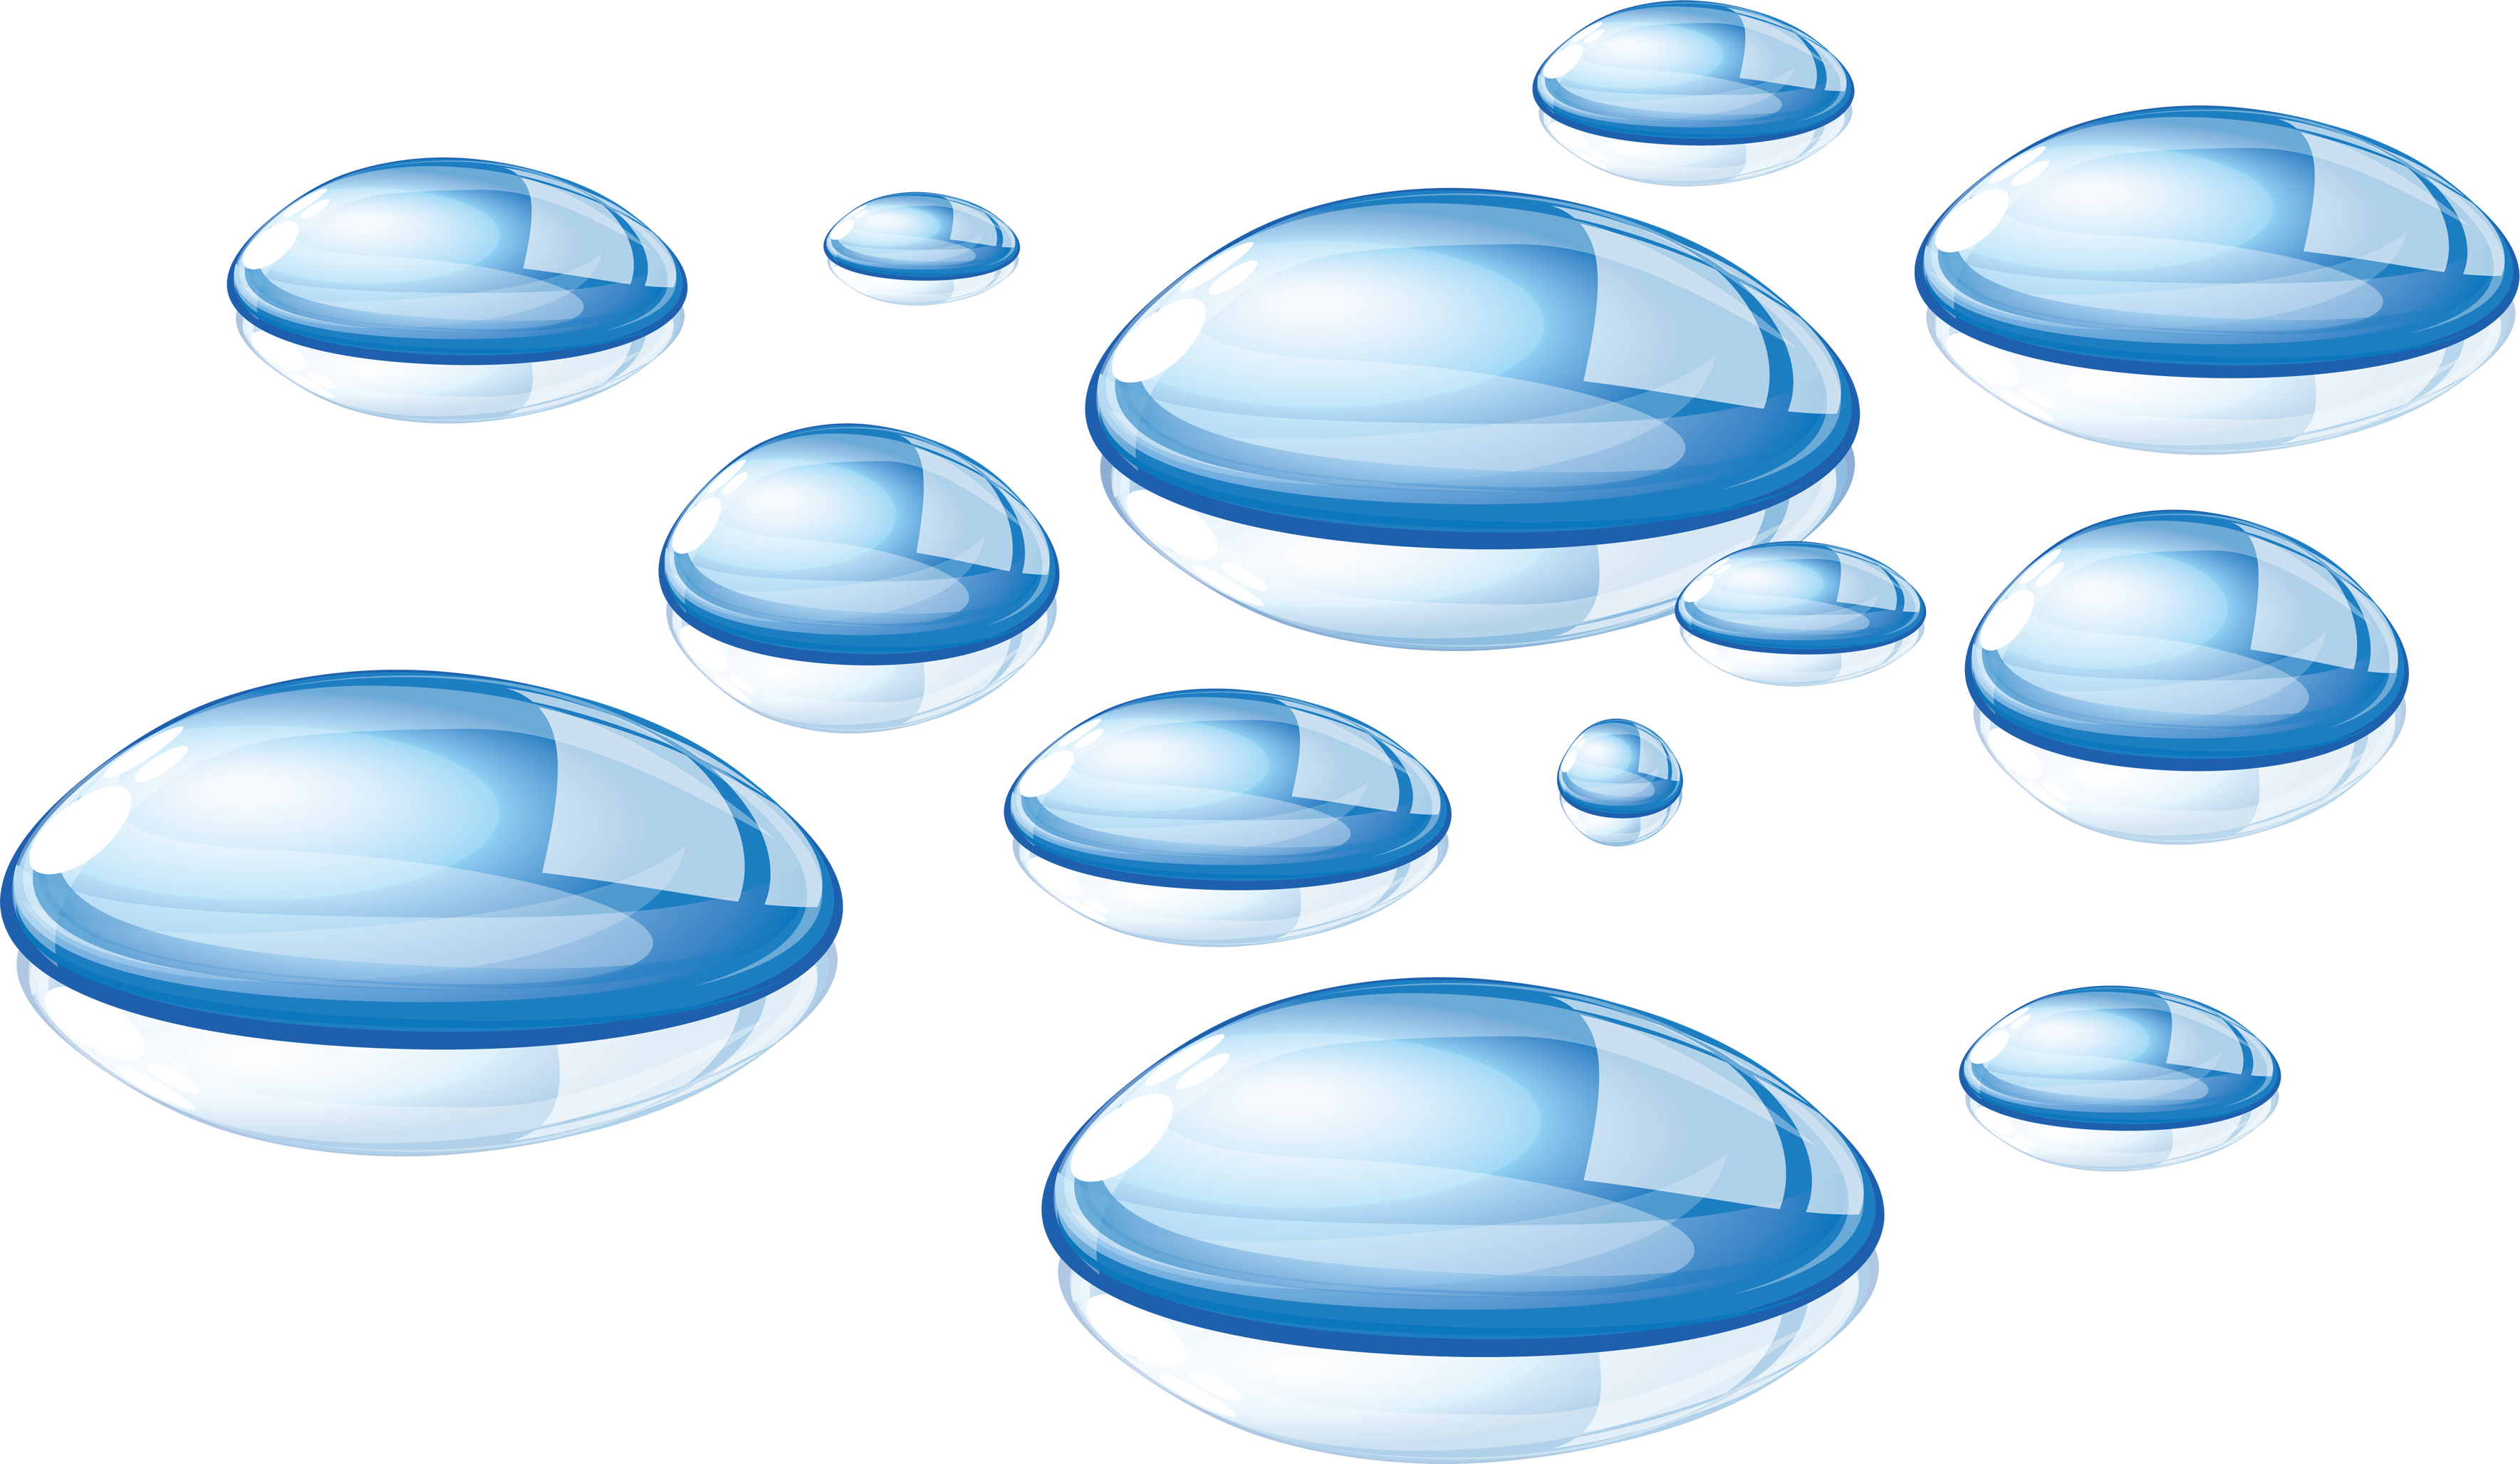 Goggles clipart water. Google images background collection